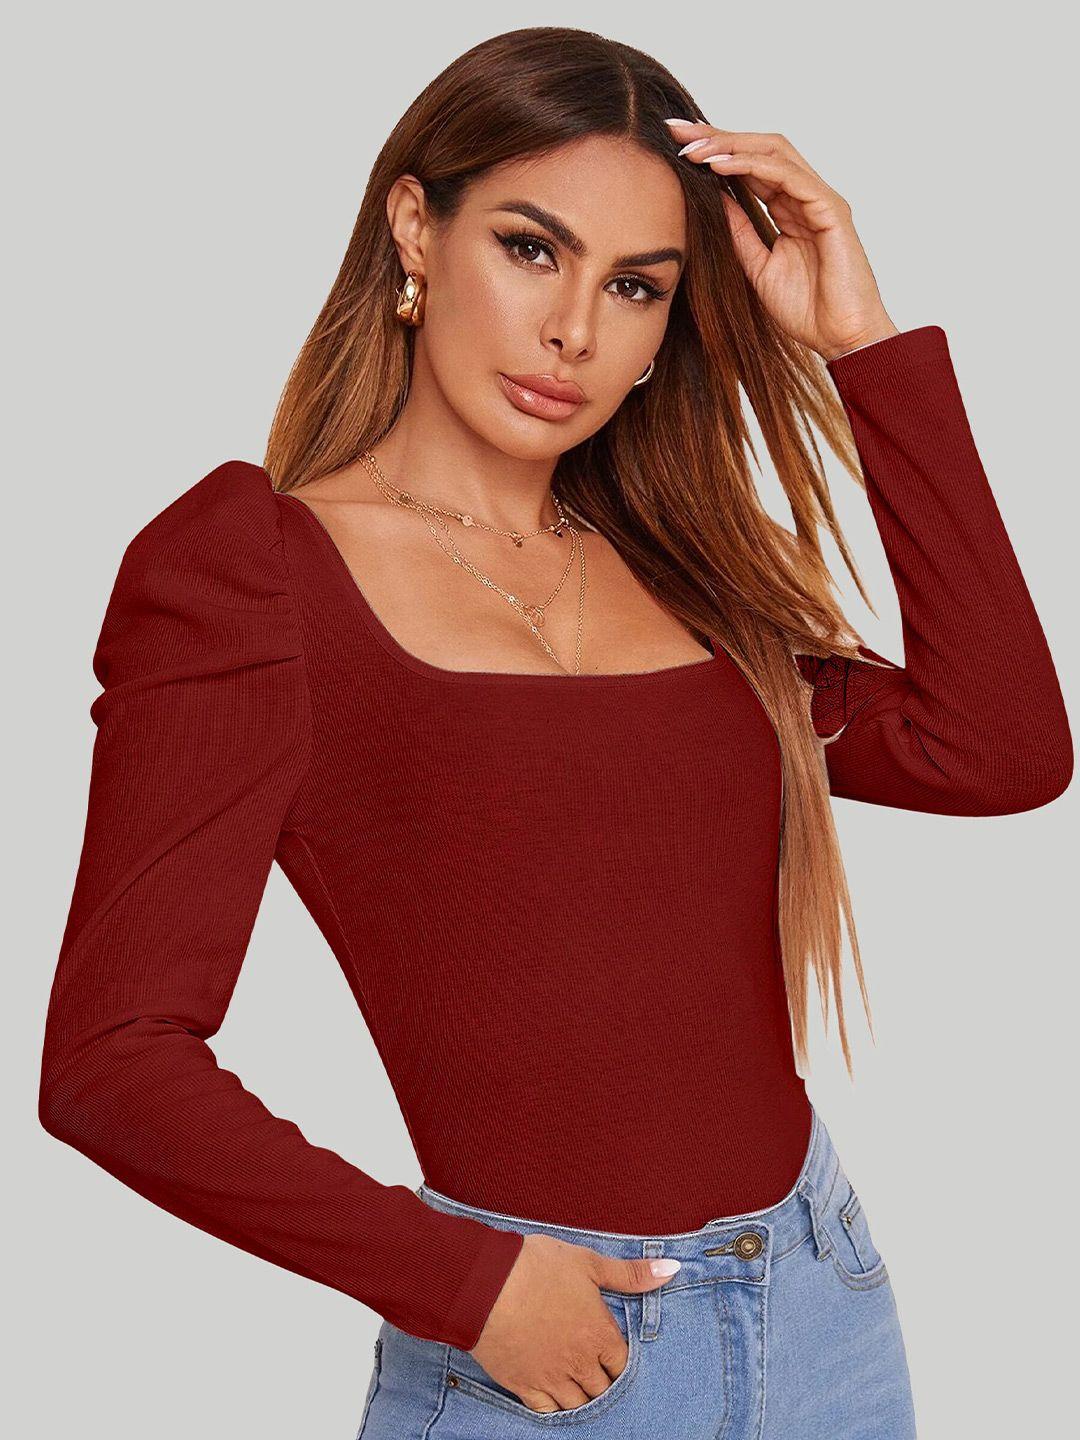 lee-tex-square-neck-puffed-sleeves-top